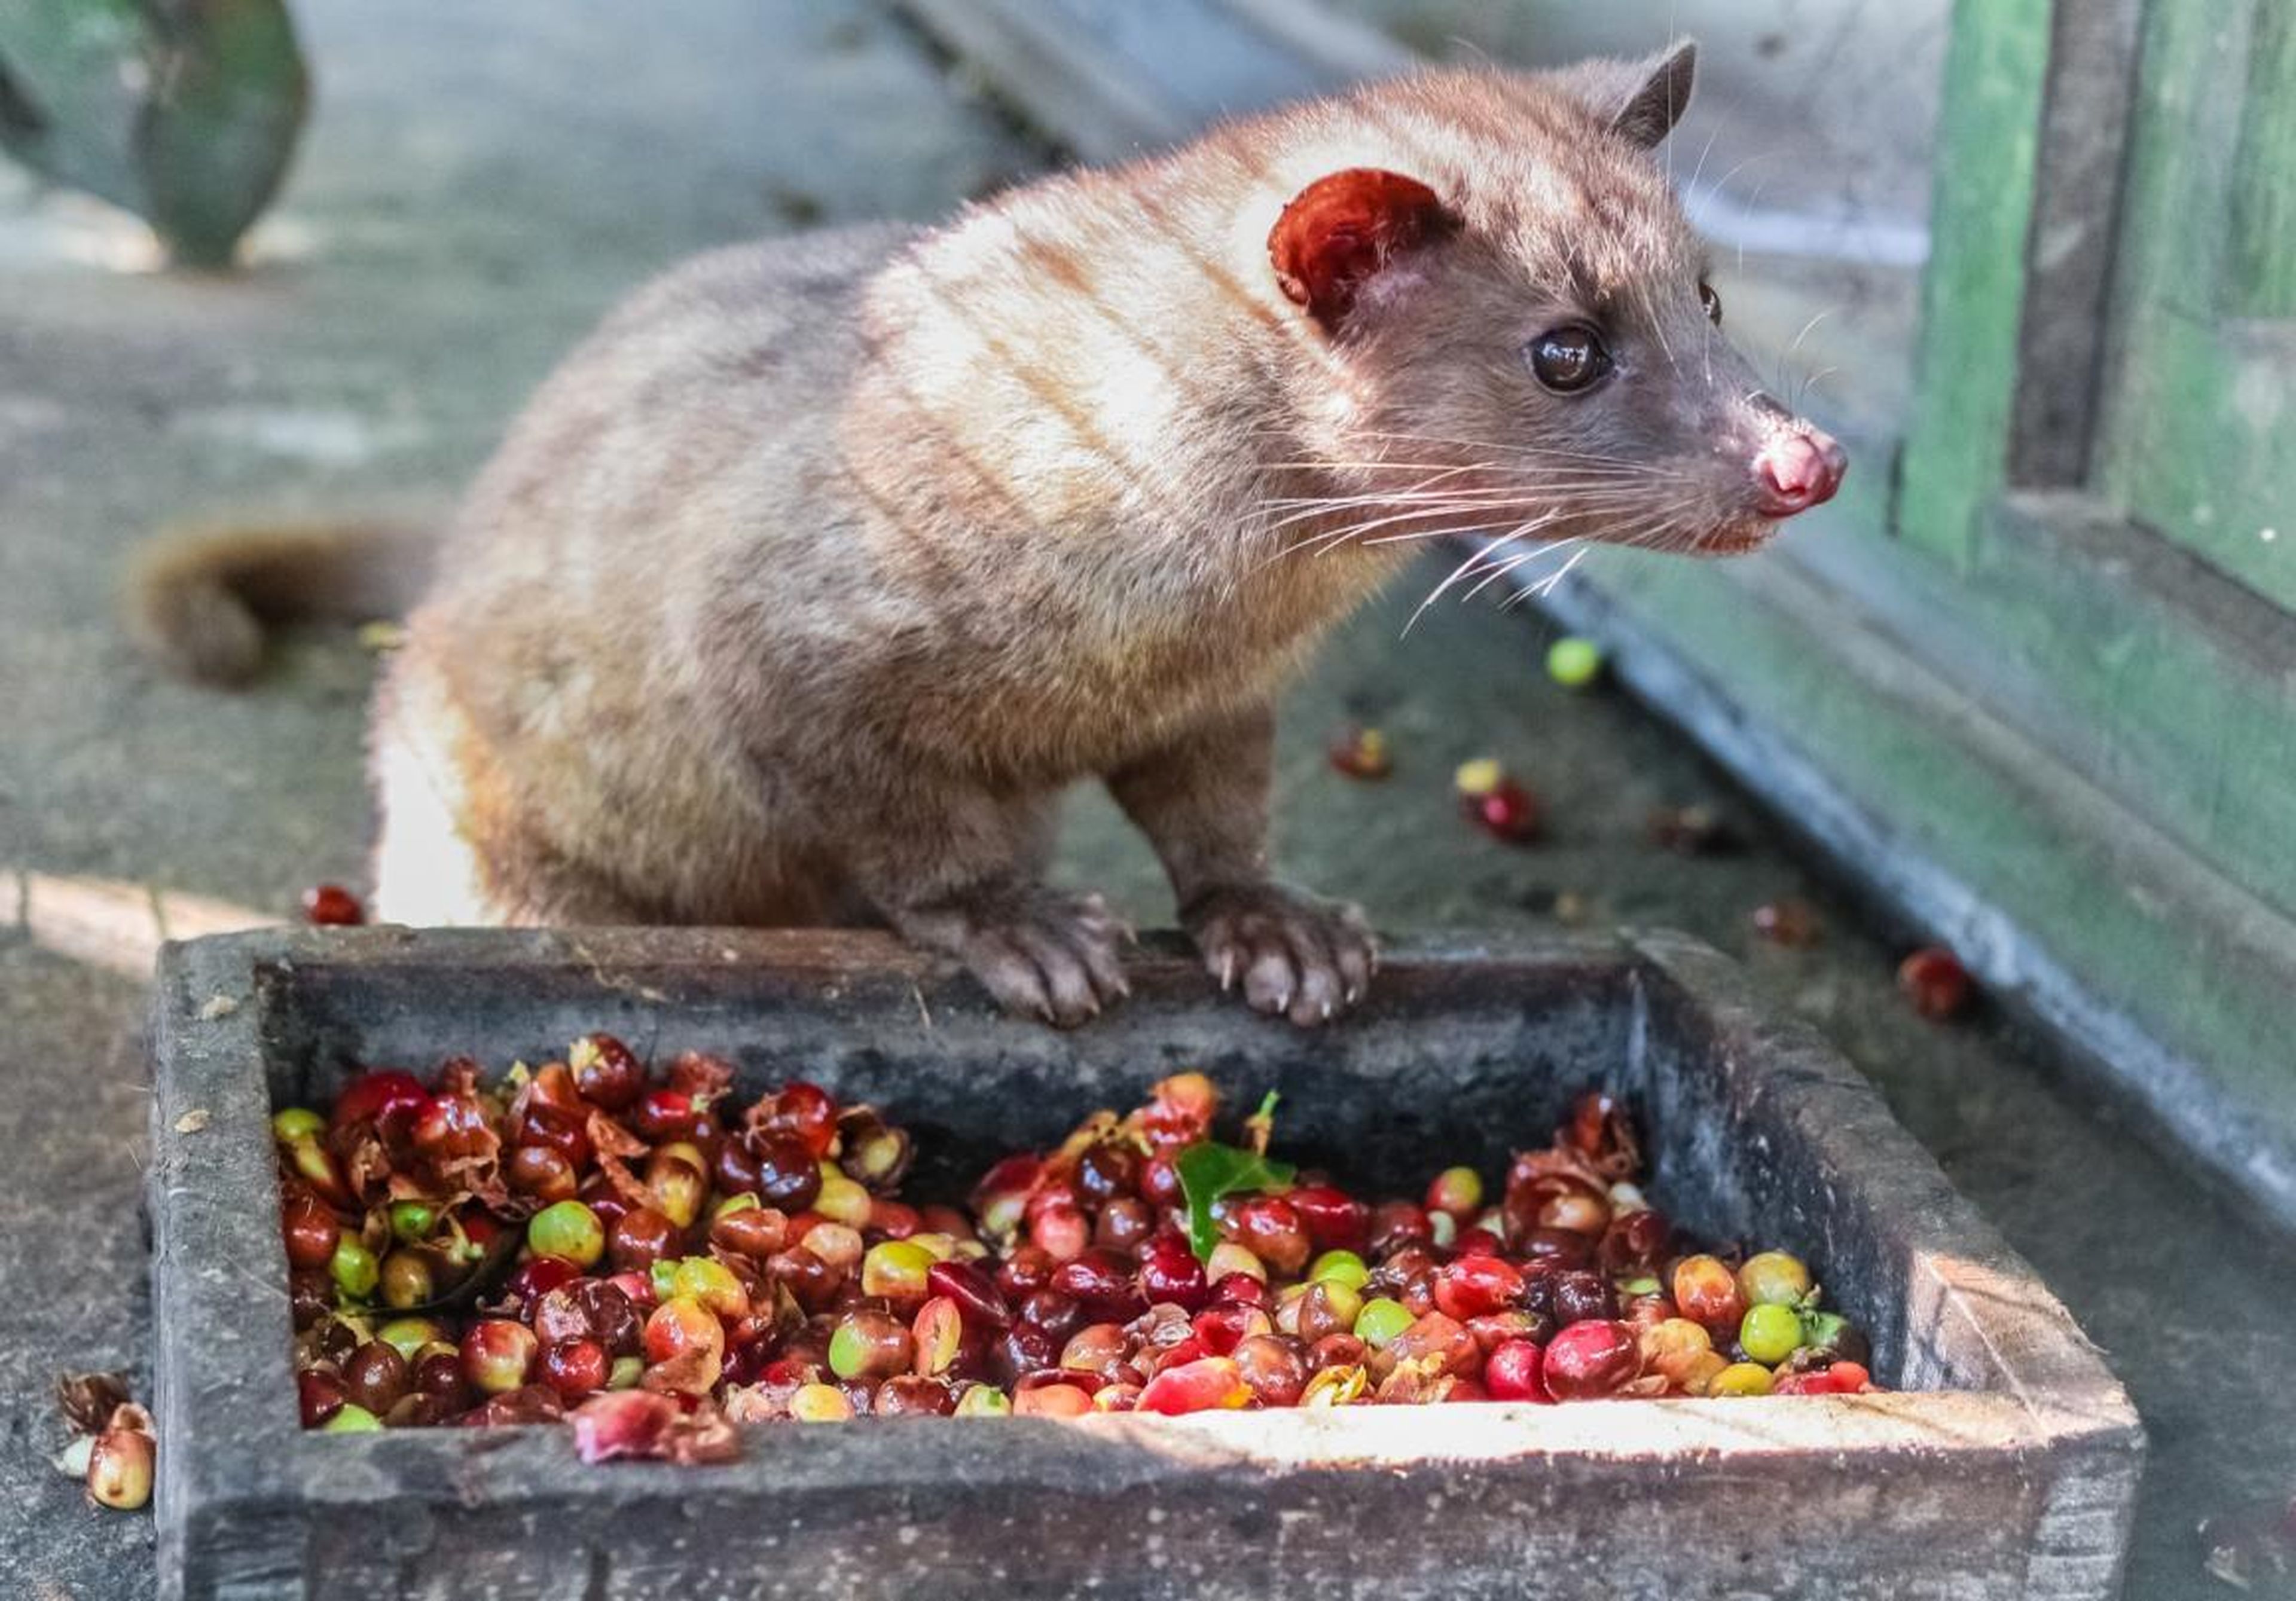 Kopi Luwak is coffee made from coffee beans that have been digested and defecated by a civet cat. Balinese farmers have touted for generations that this method produces the best-tasting coffee.